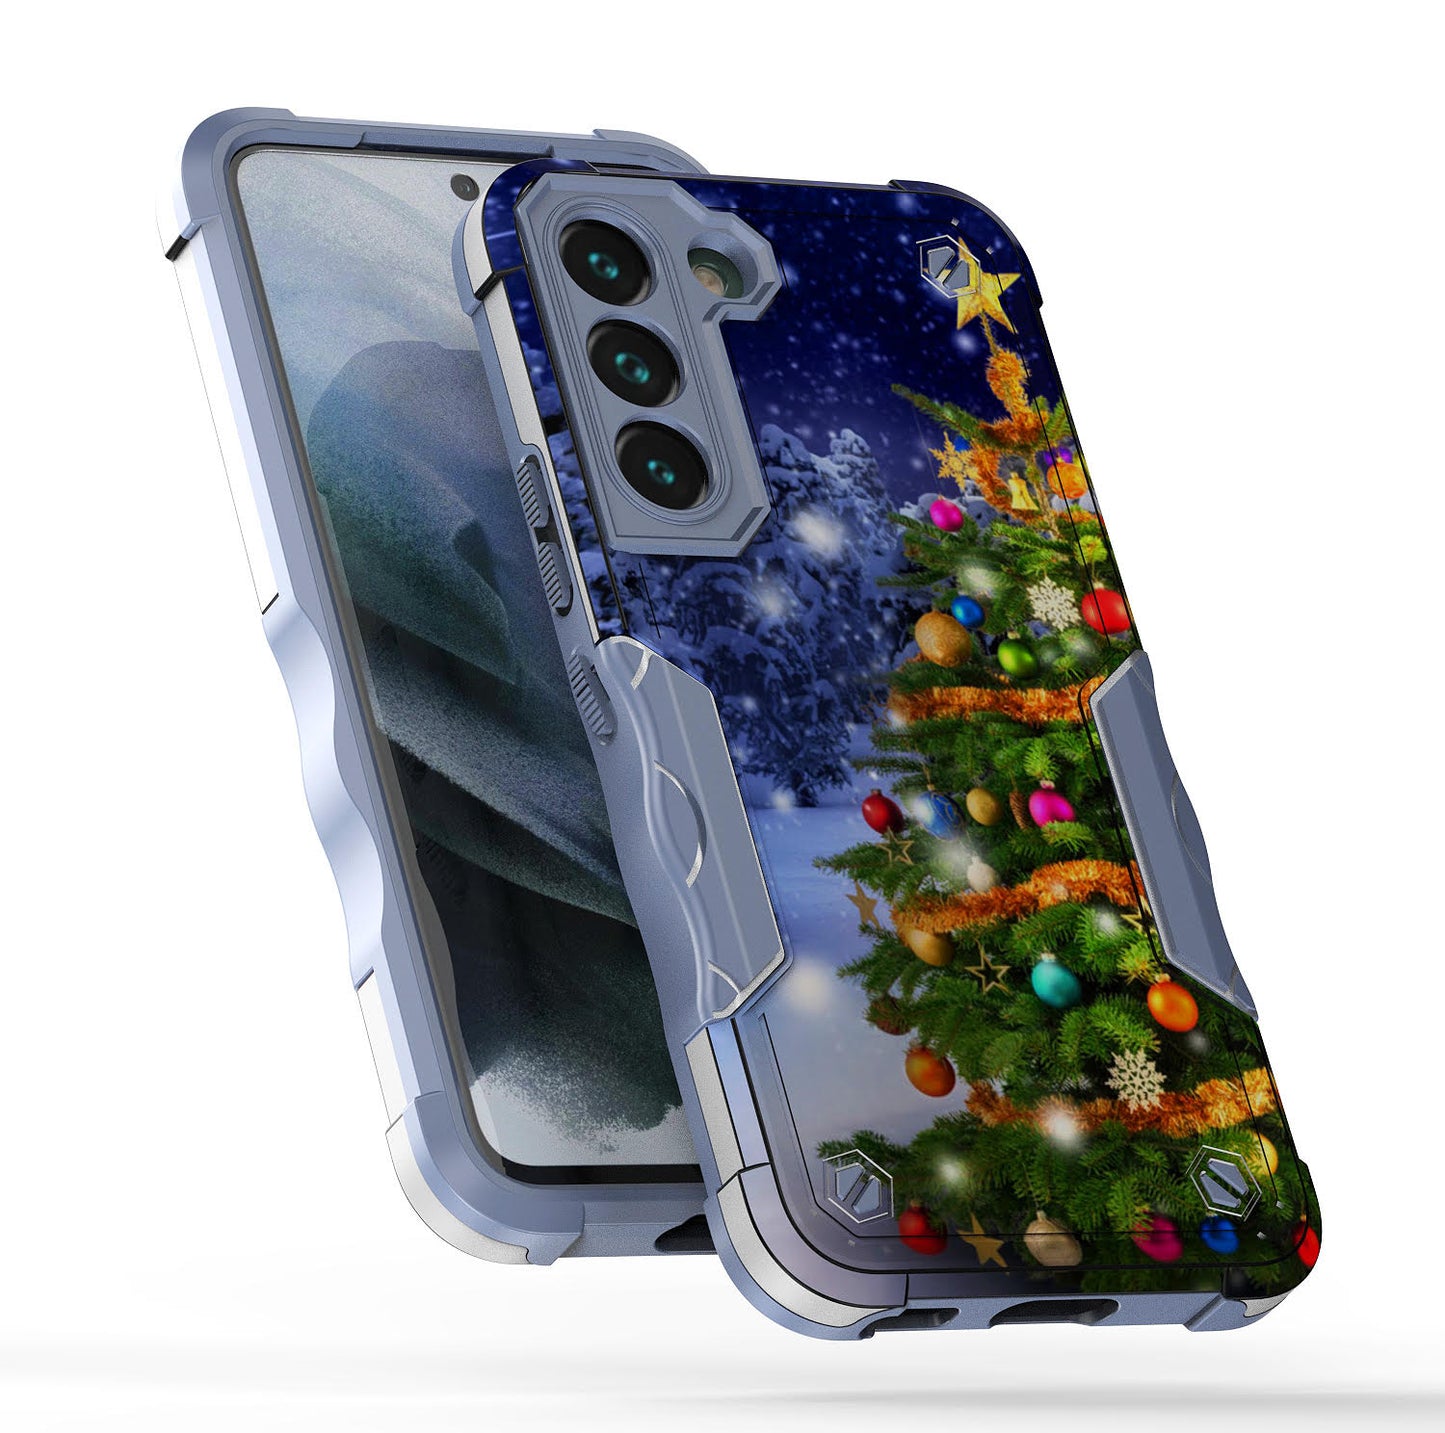 Case For Samsung Galaxy S22 PLUS - Hybrid Grip Design Shockproof Phone Cover - Christmas Tree